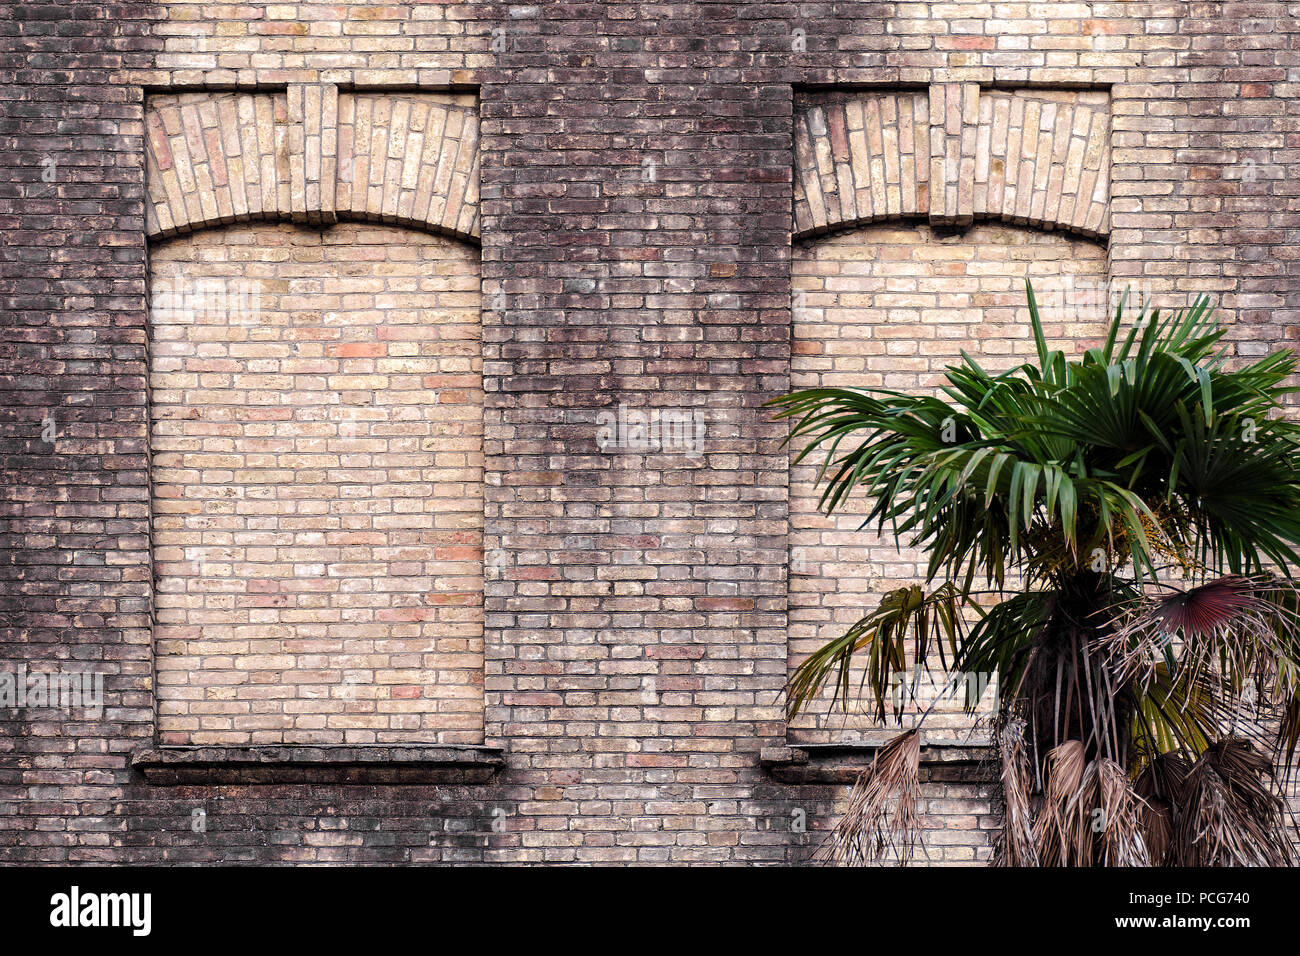 Old brick wall with two false windows, green palm tree near building. Abstract vintage style architecture background.  Batumi, Georgia. Stock Photo